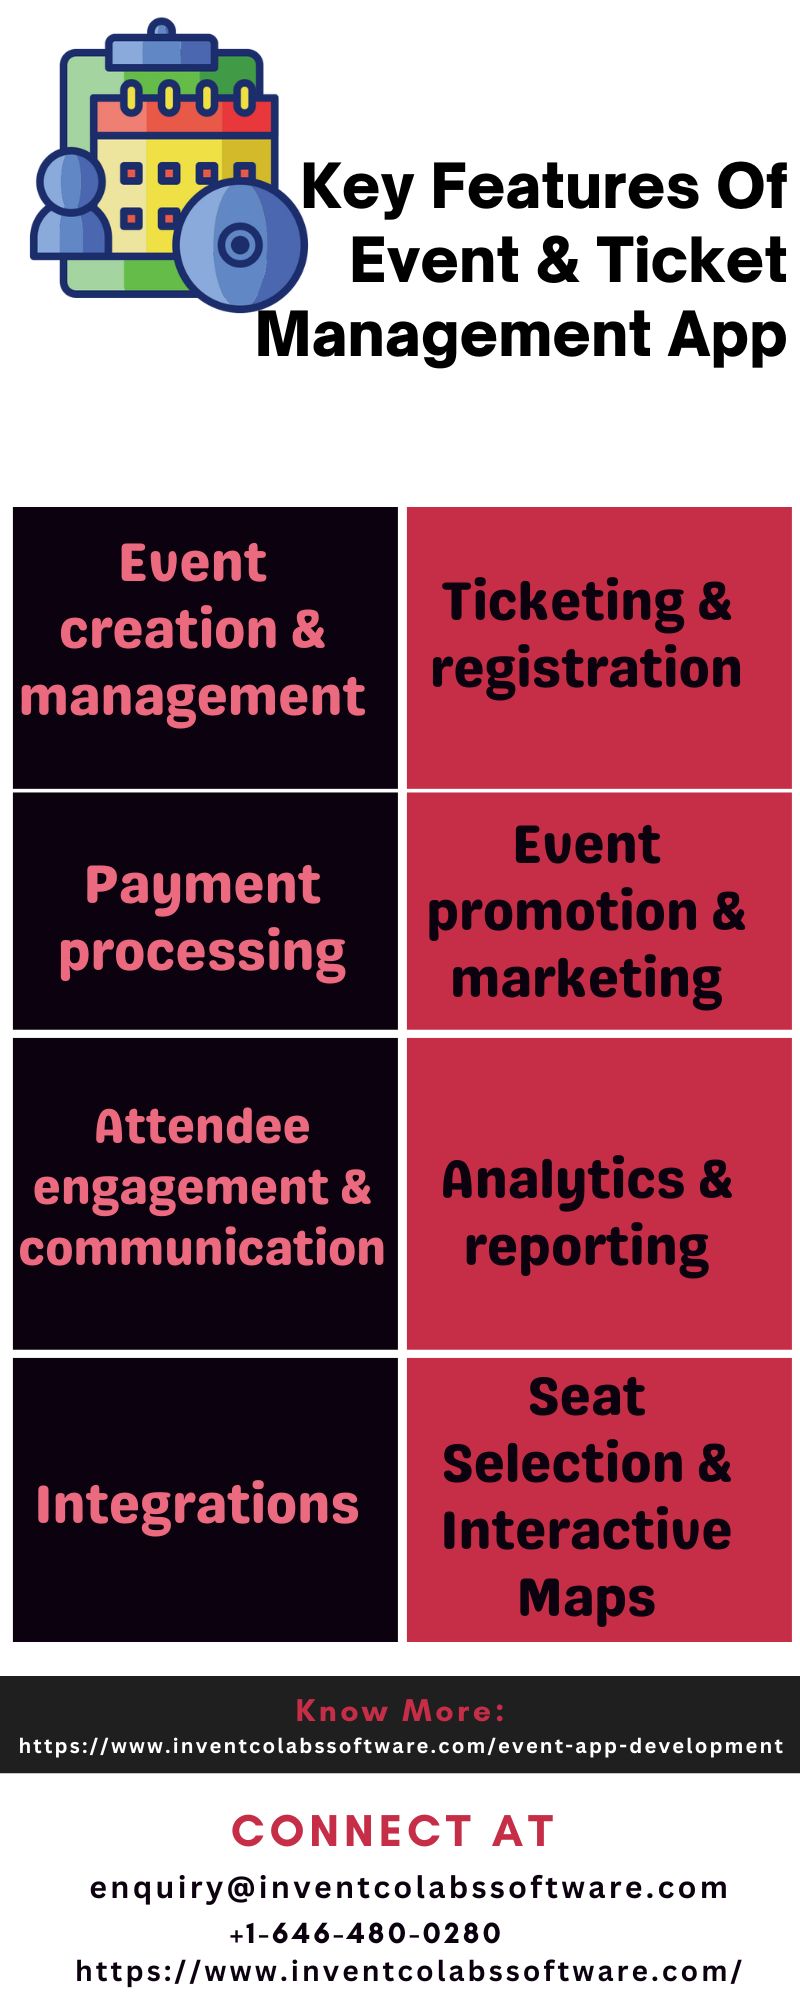 How To Hire An Event & Ticket Management App Development Company?